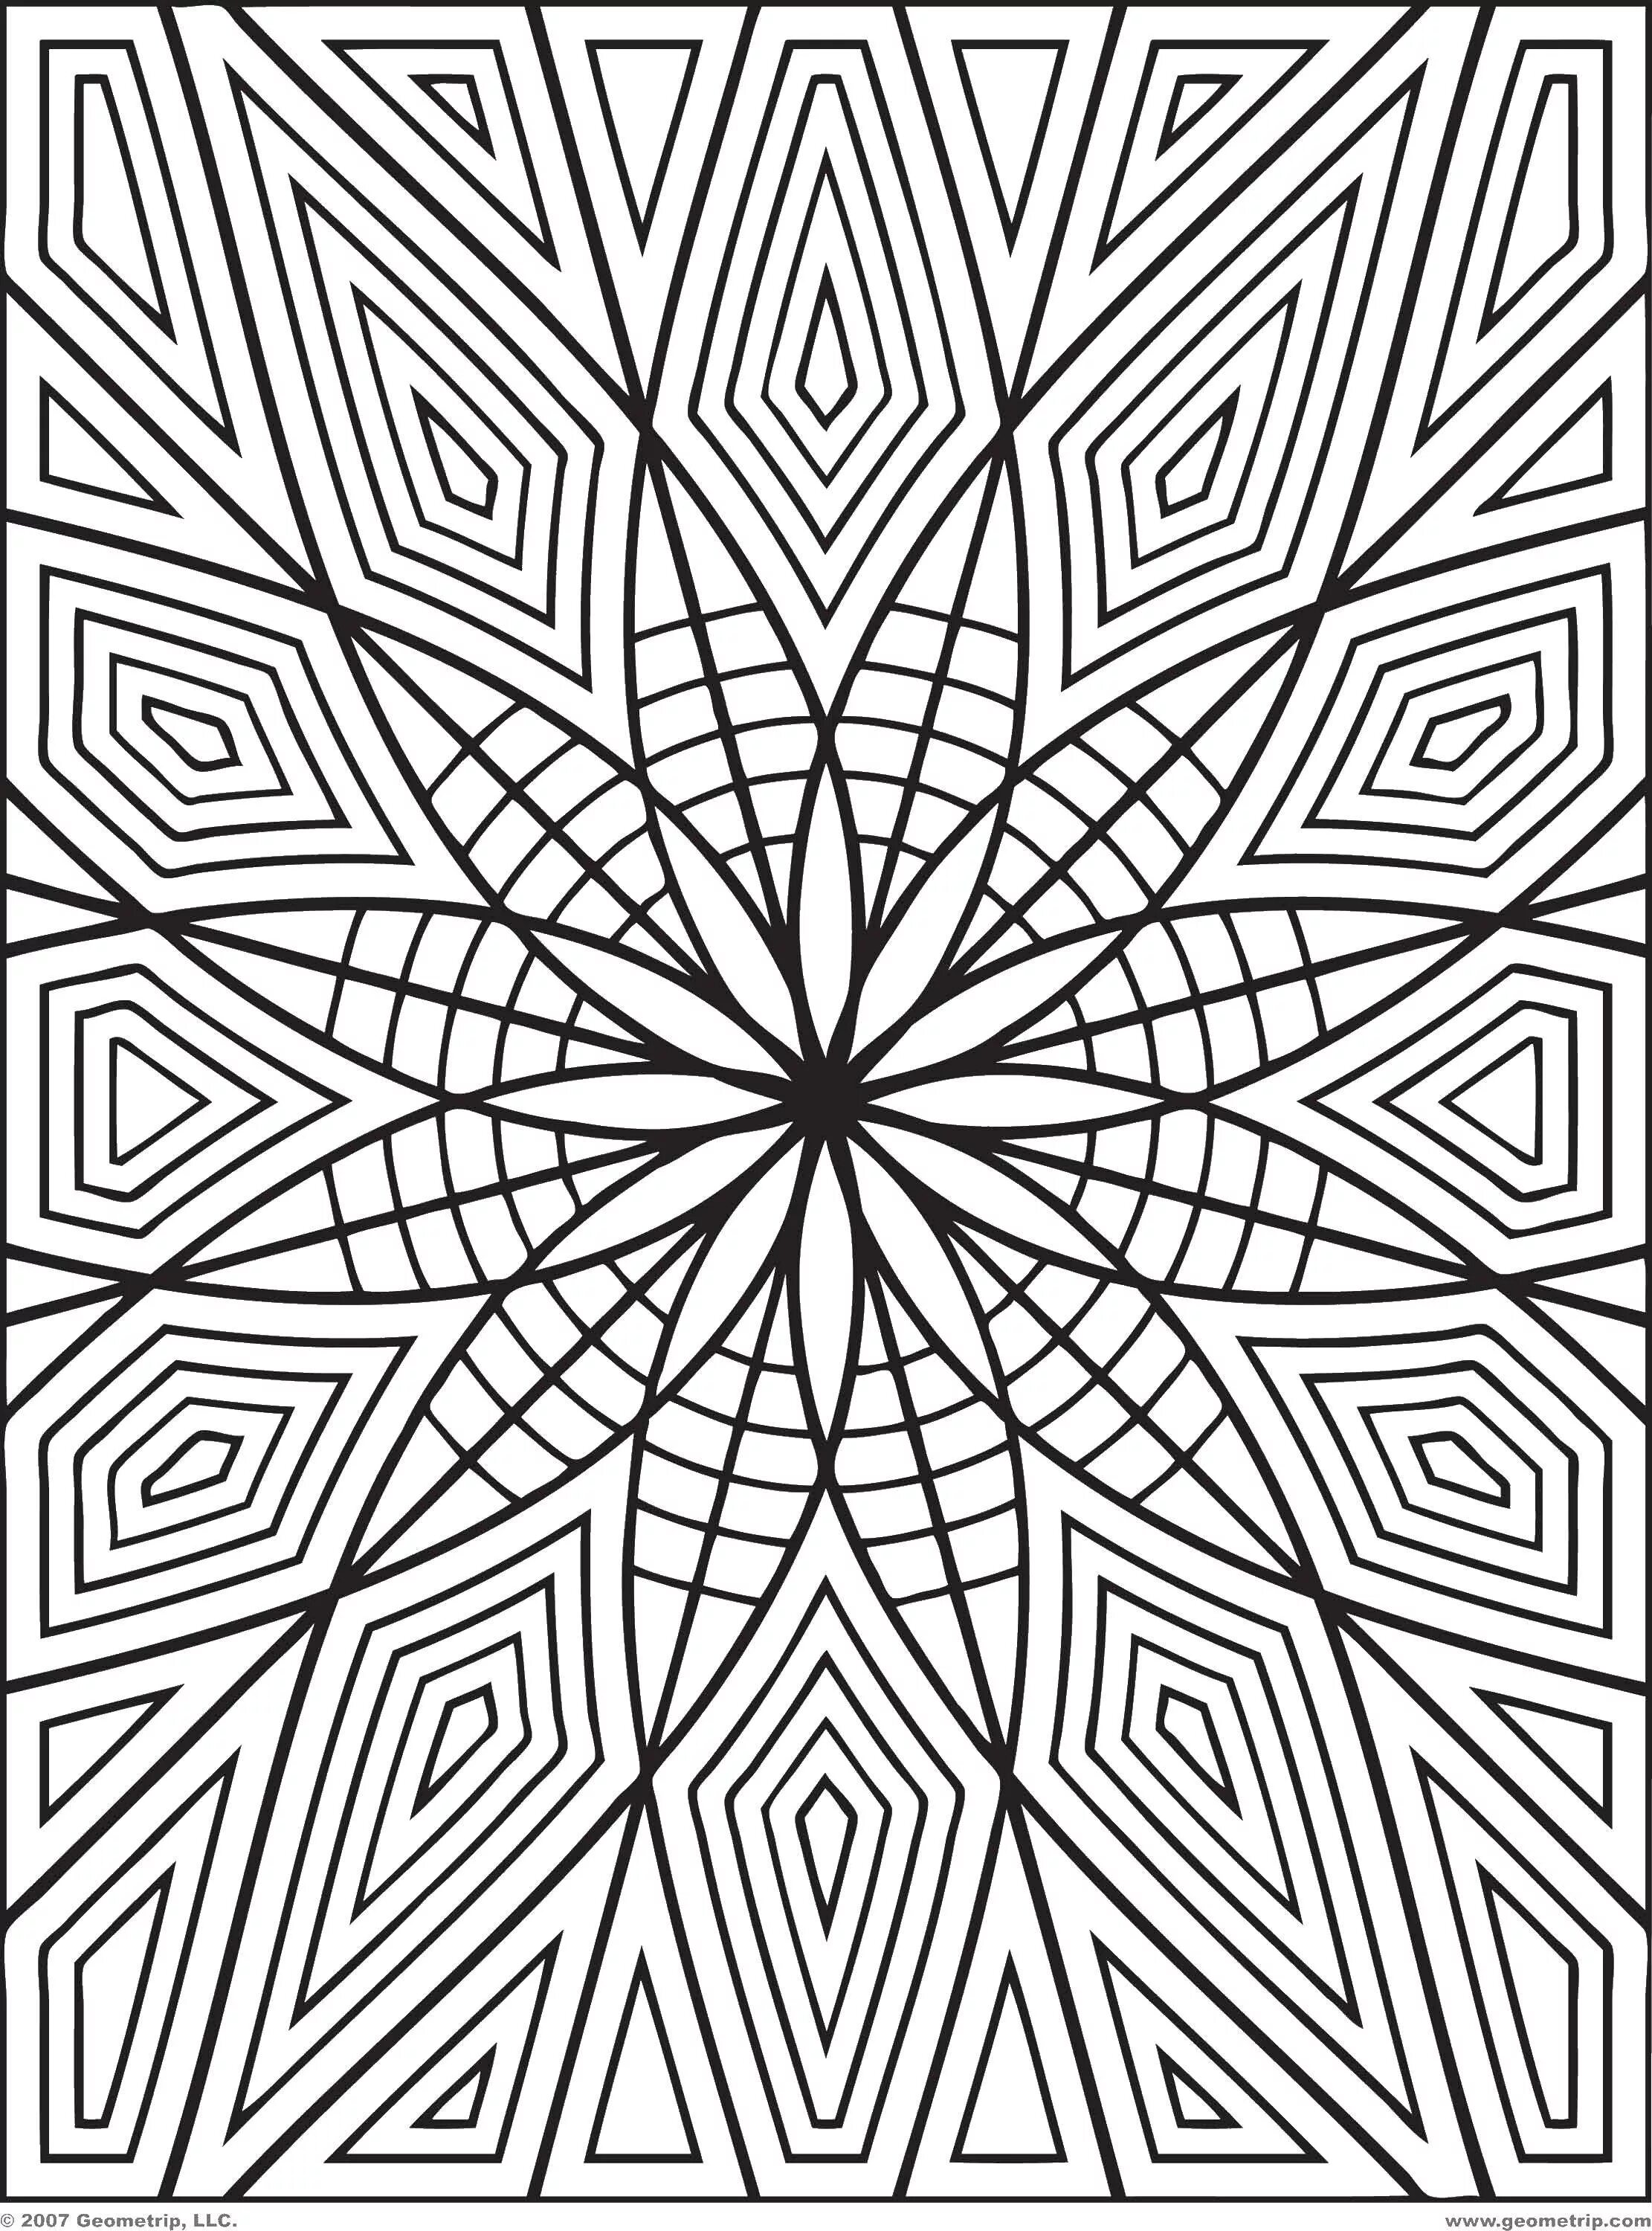 Coloring page with funny geometric pattern